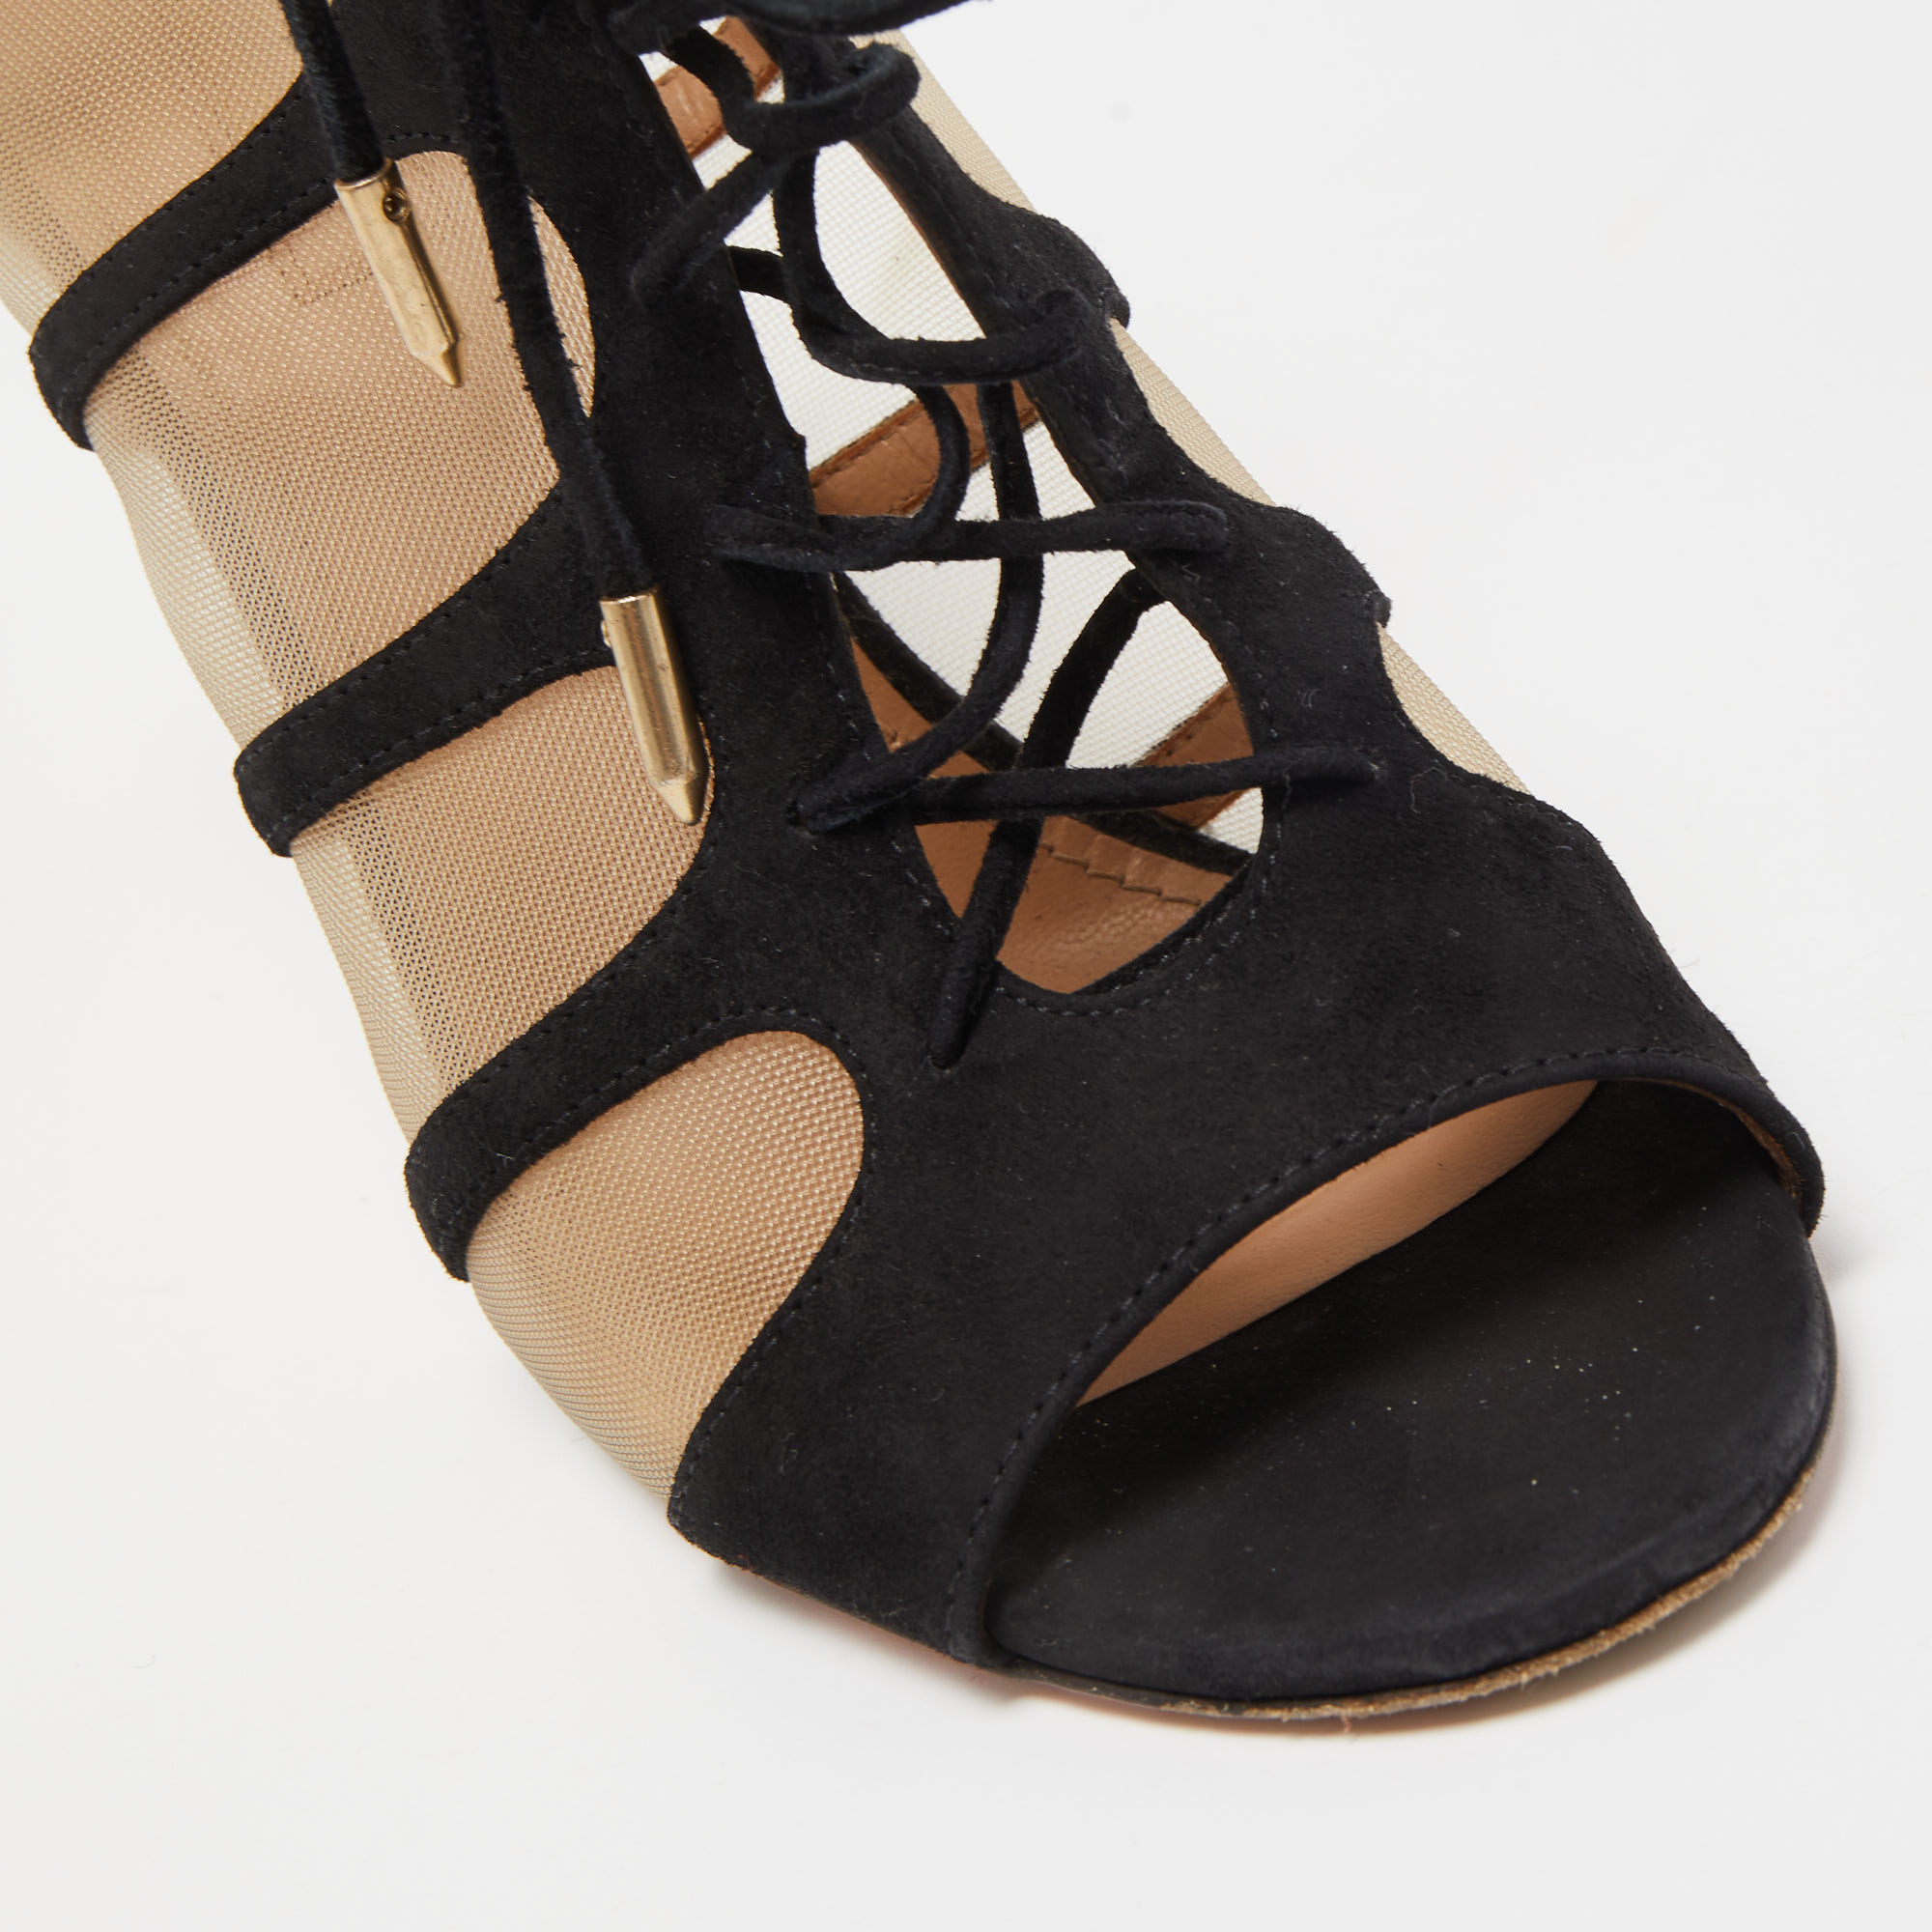 Aquazzura Black Lace And Suede Lace Up  Booties Size 36.5